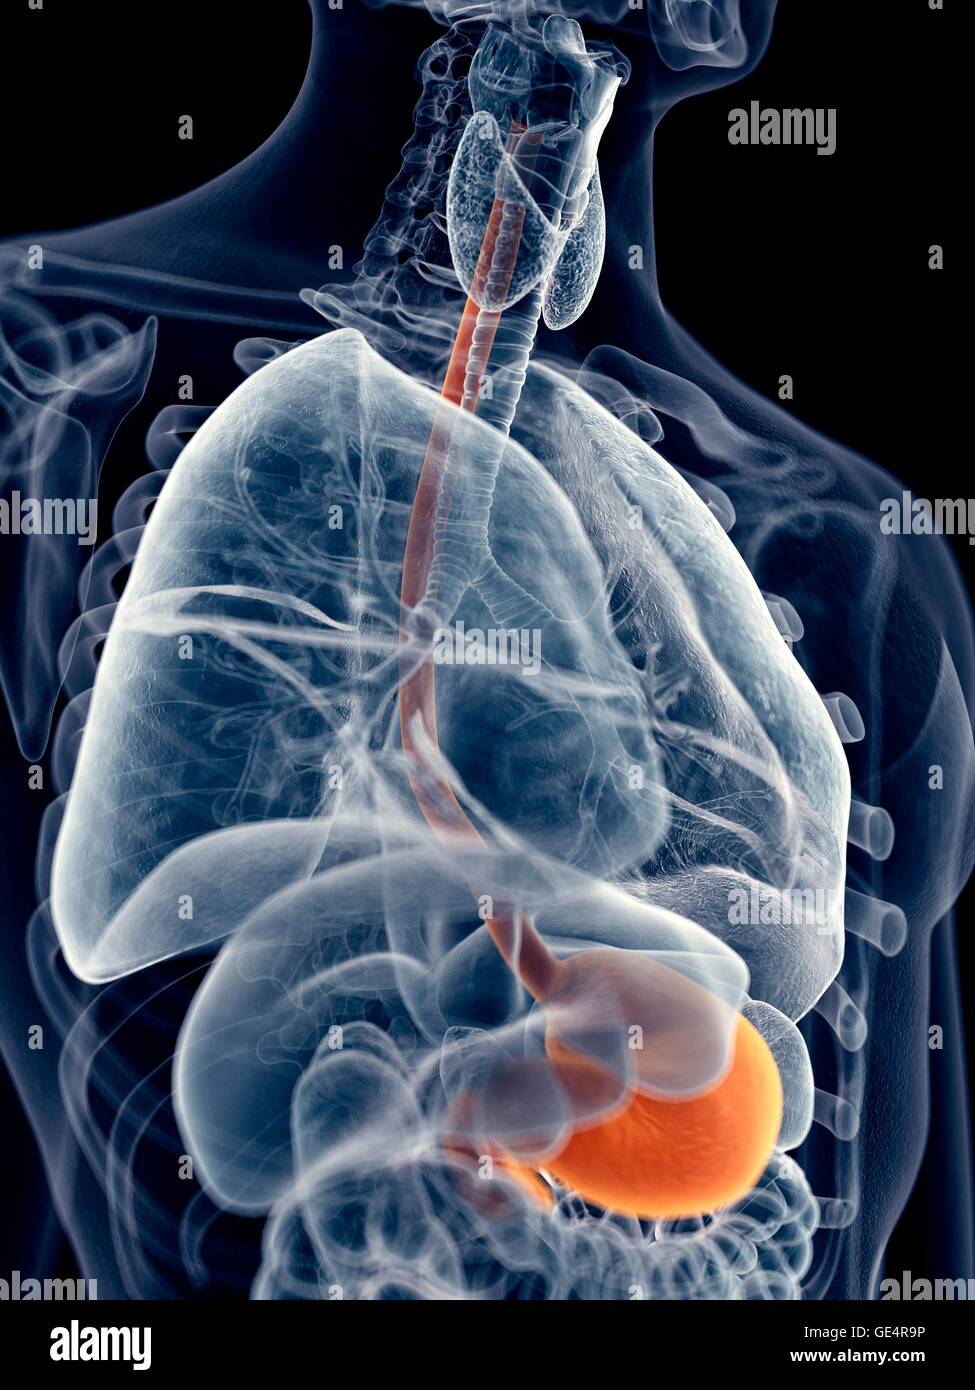 Human esophagus and stomach, illustration. Stock Photo